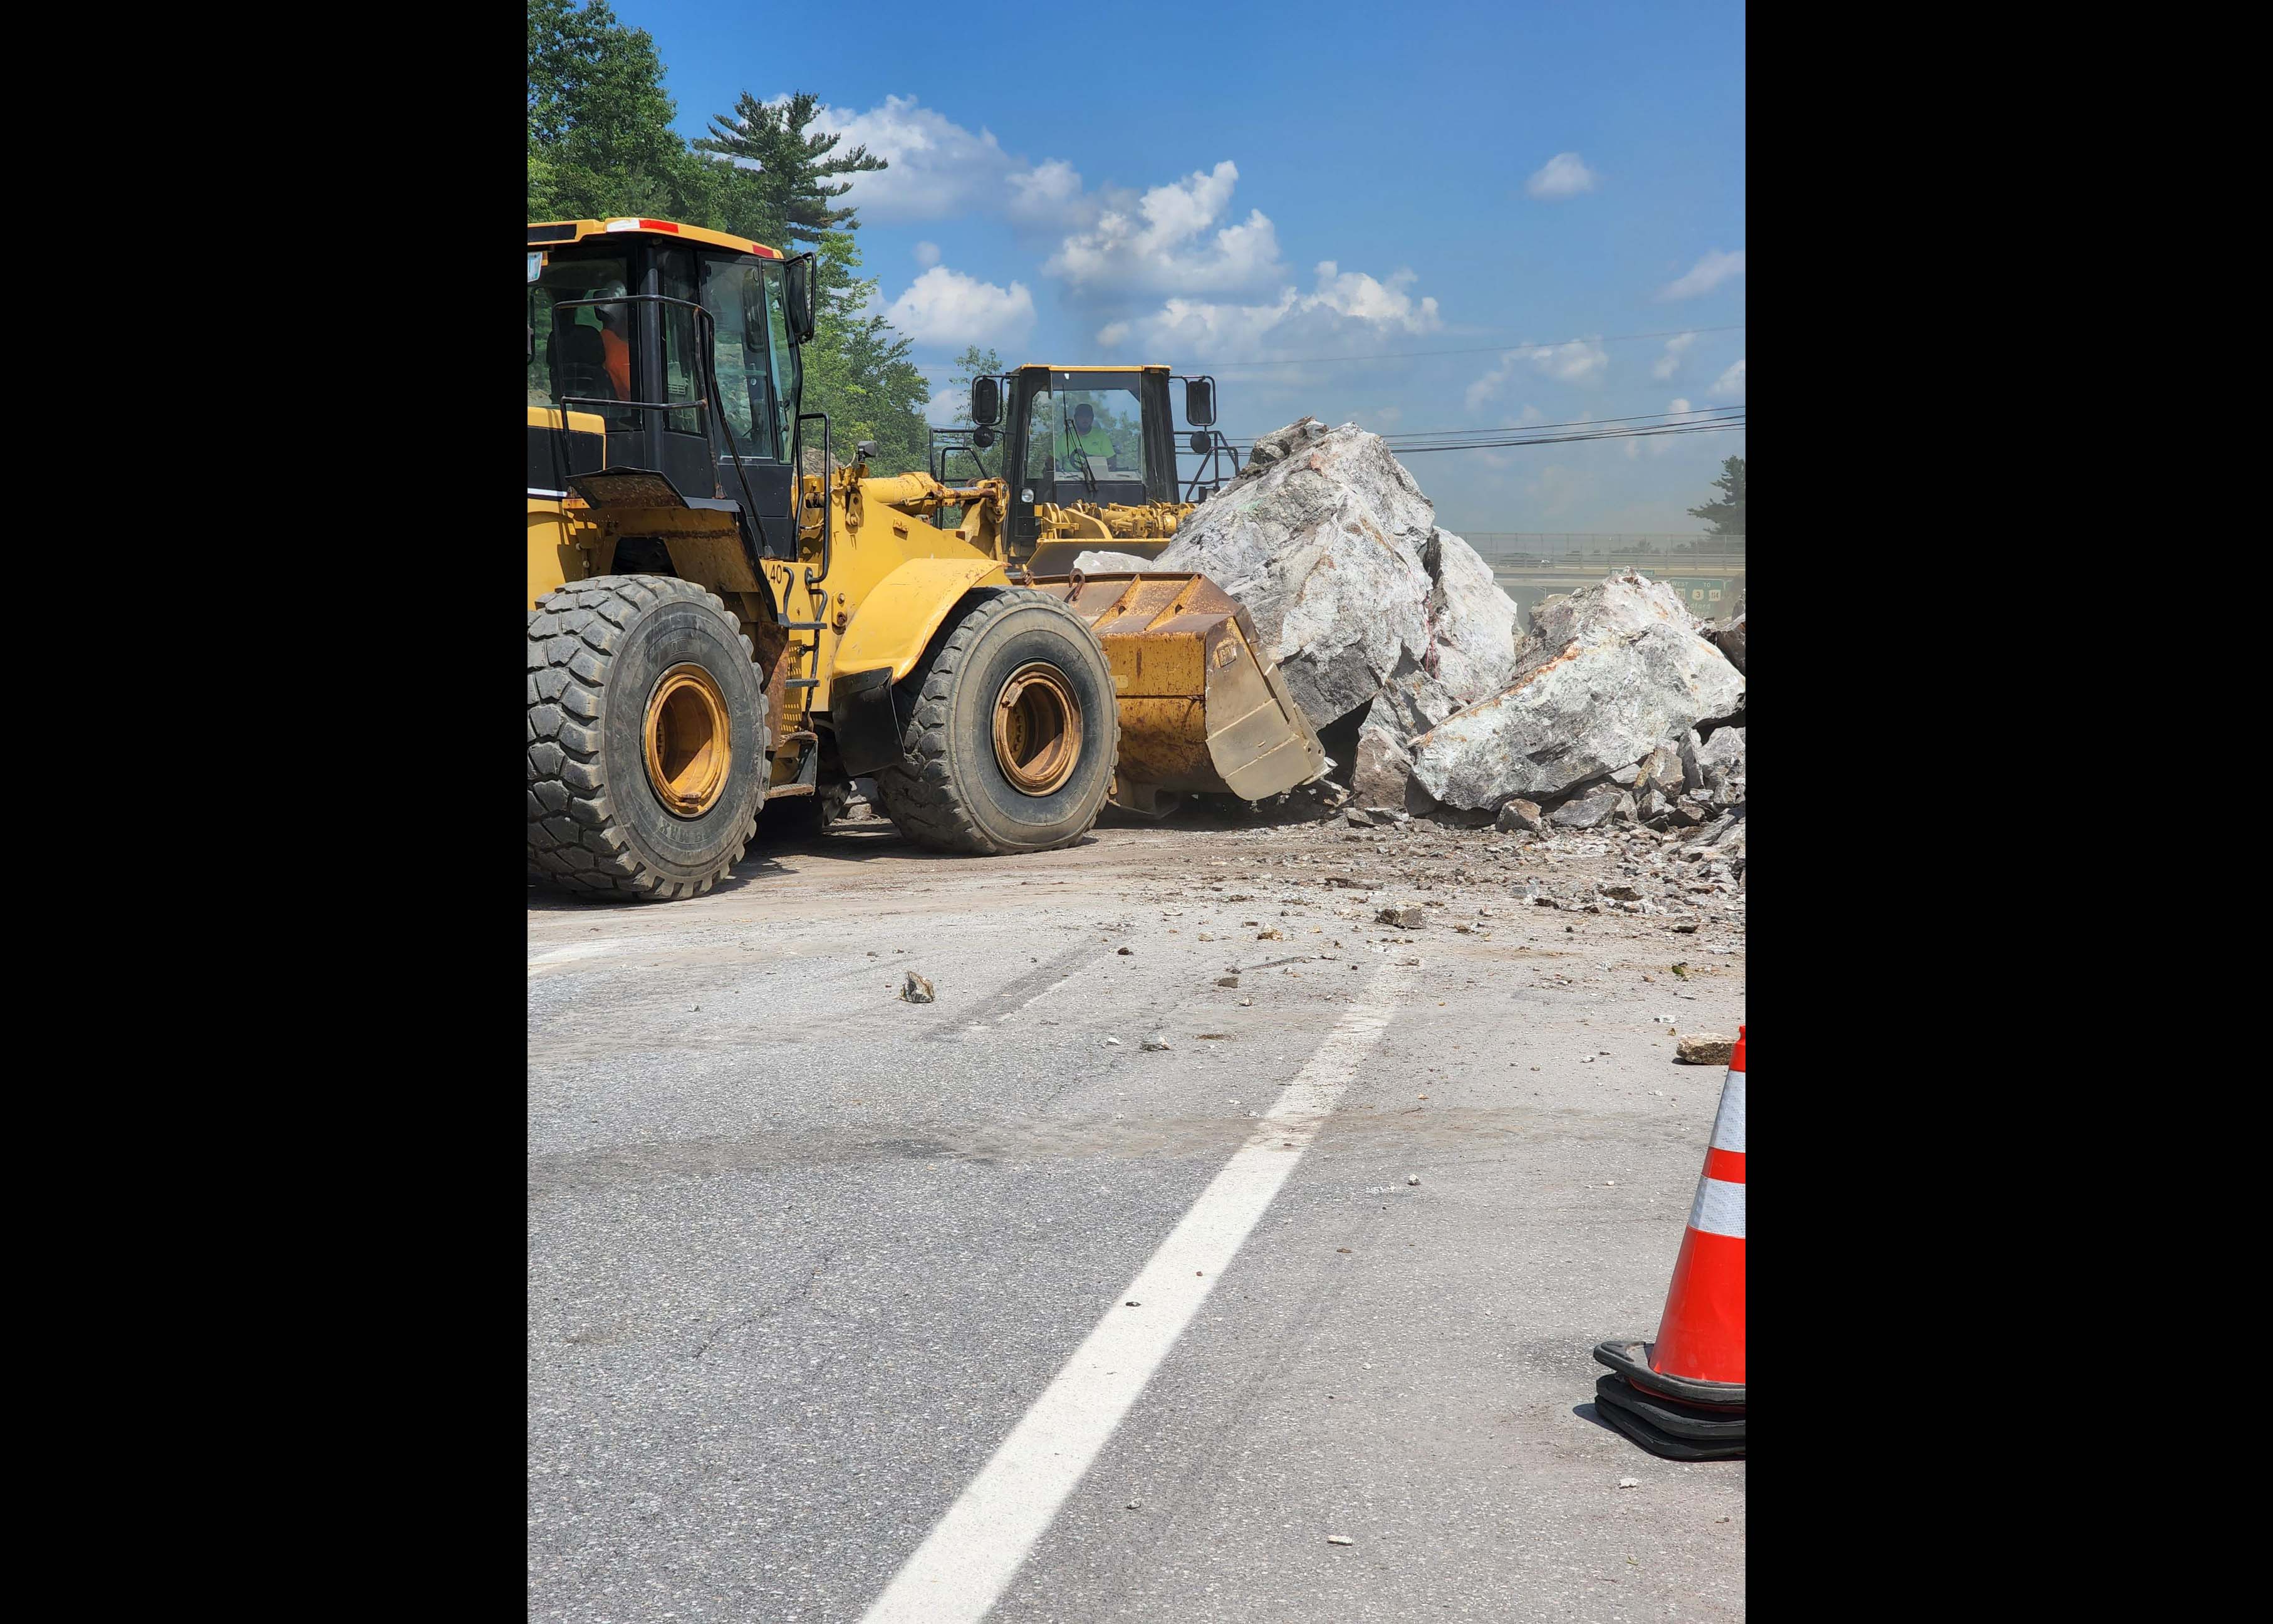 Rock being removed from the road after a blast - August 2022